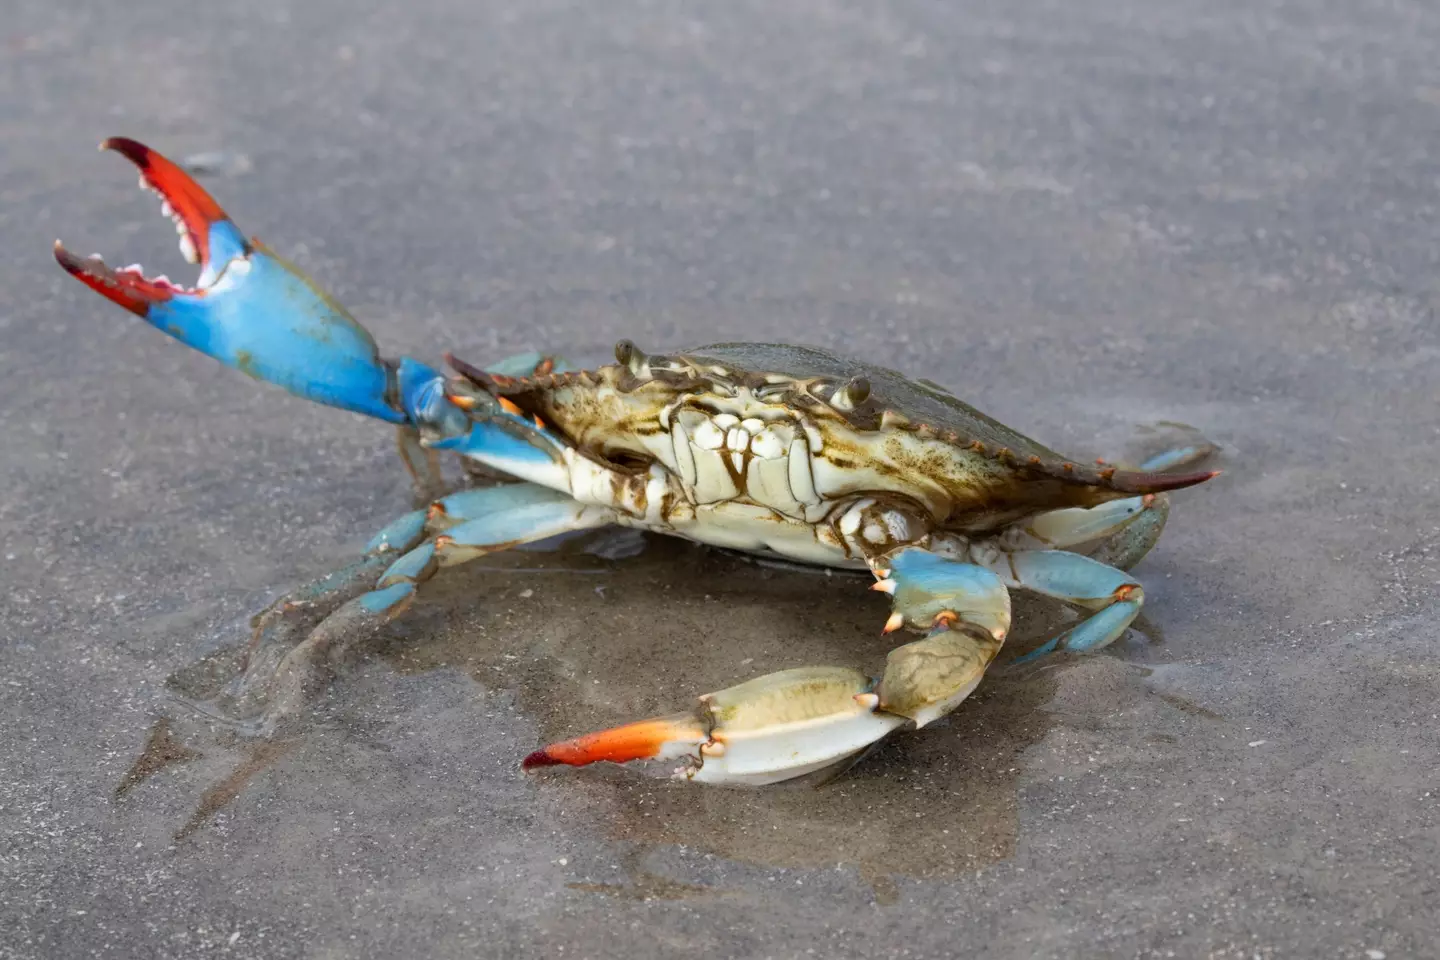 The blue crab is one of nearly 1,000 alien (non-native) species to have set up their home in the Mediterranean Sea.